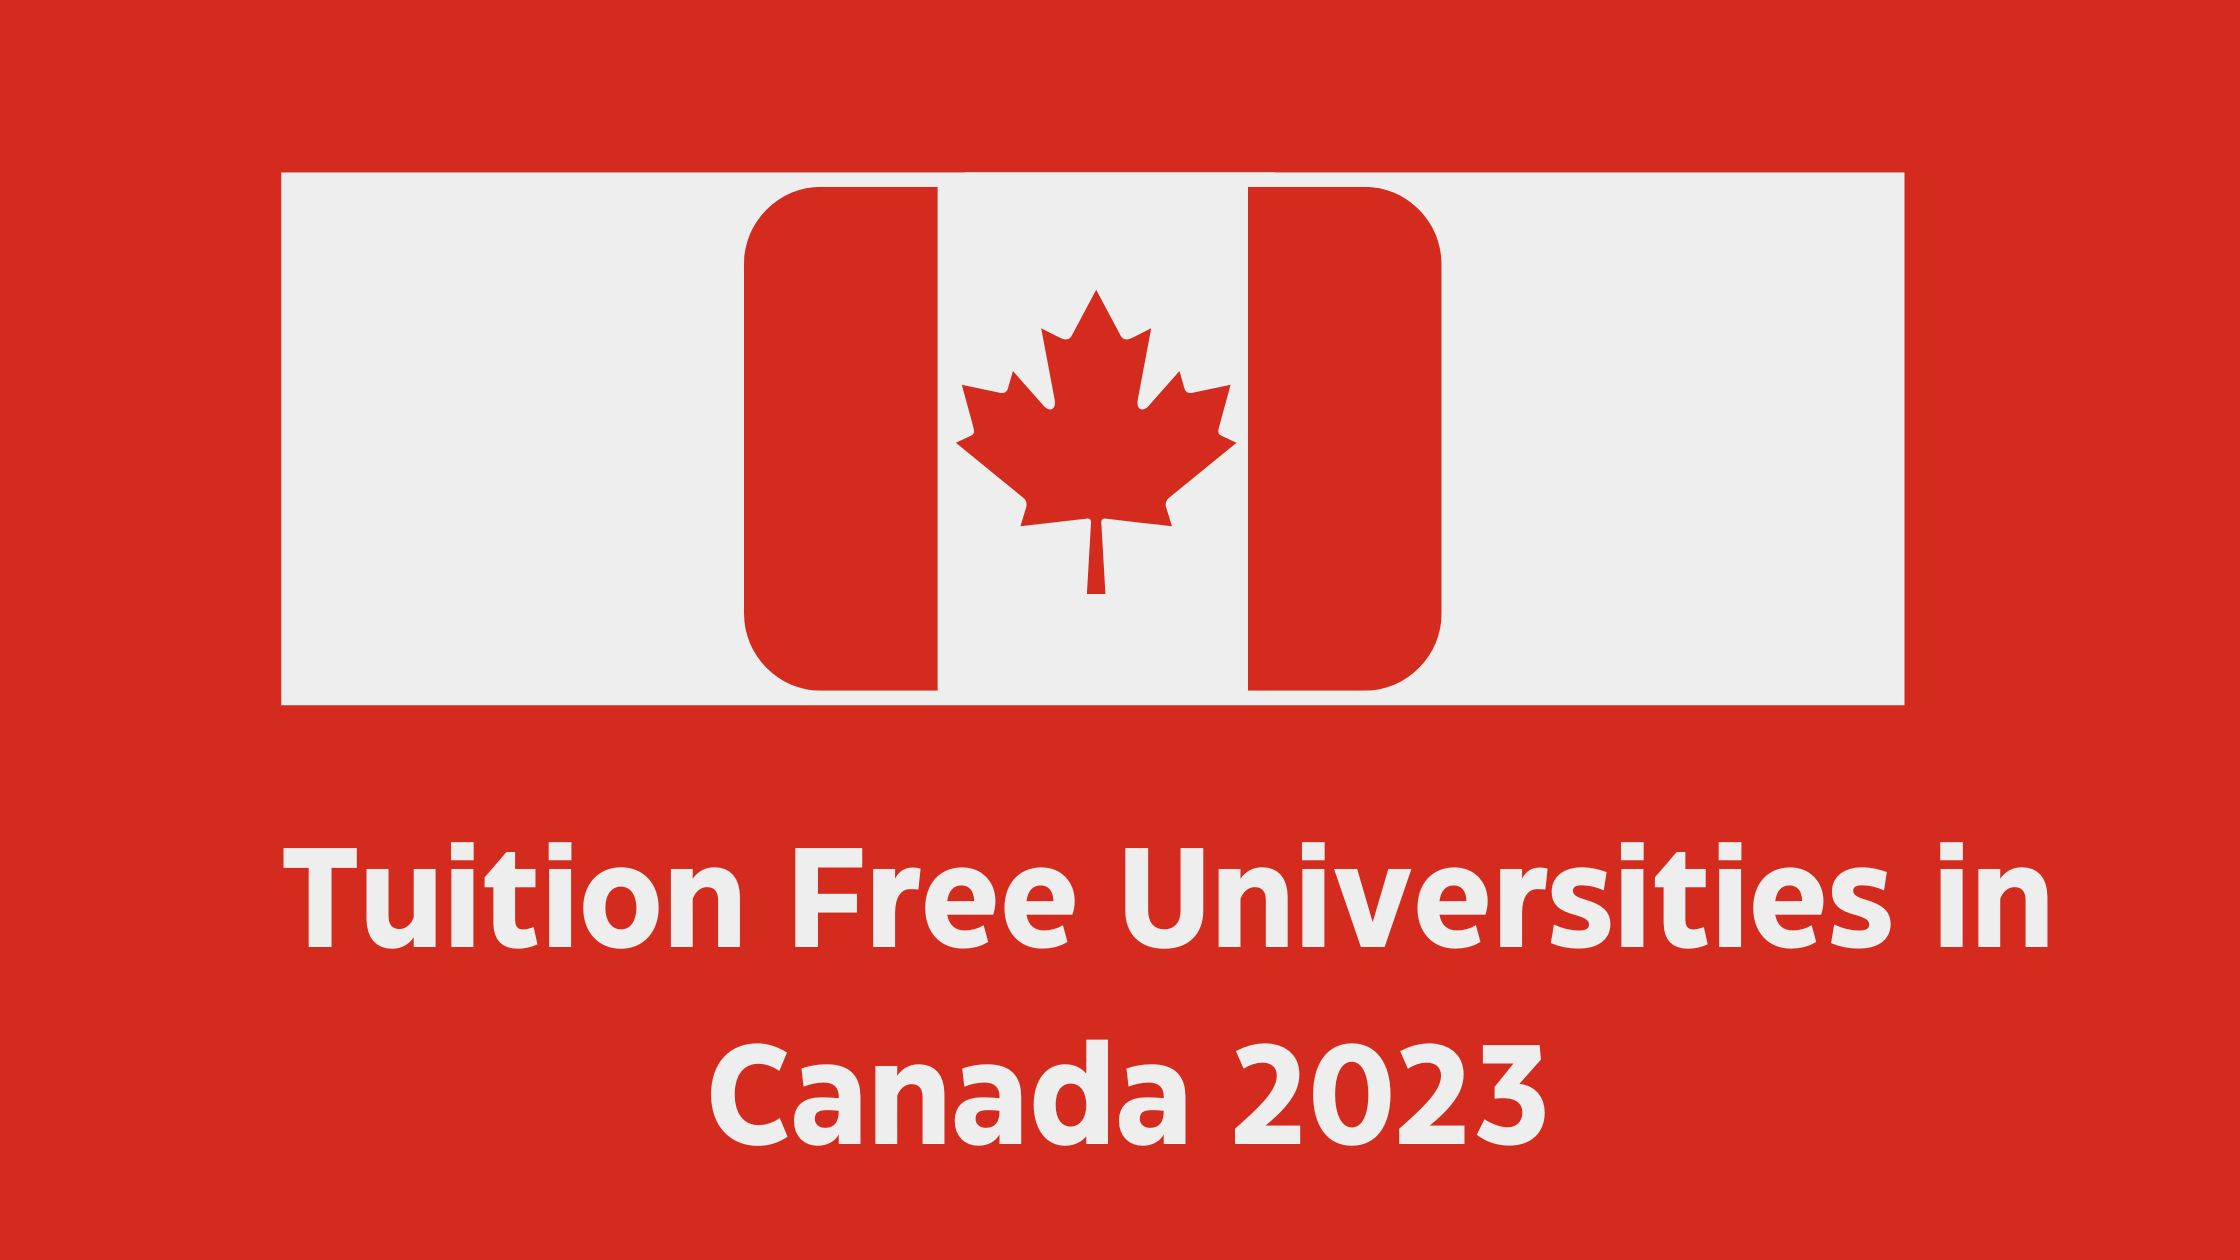 Tuition Free Universities in Canada 2023